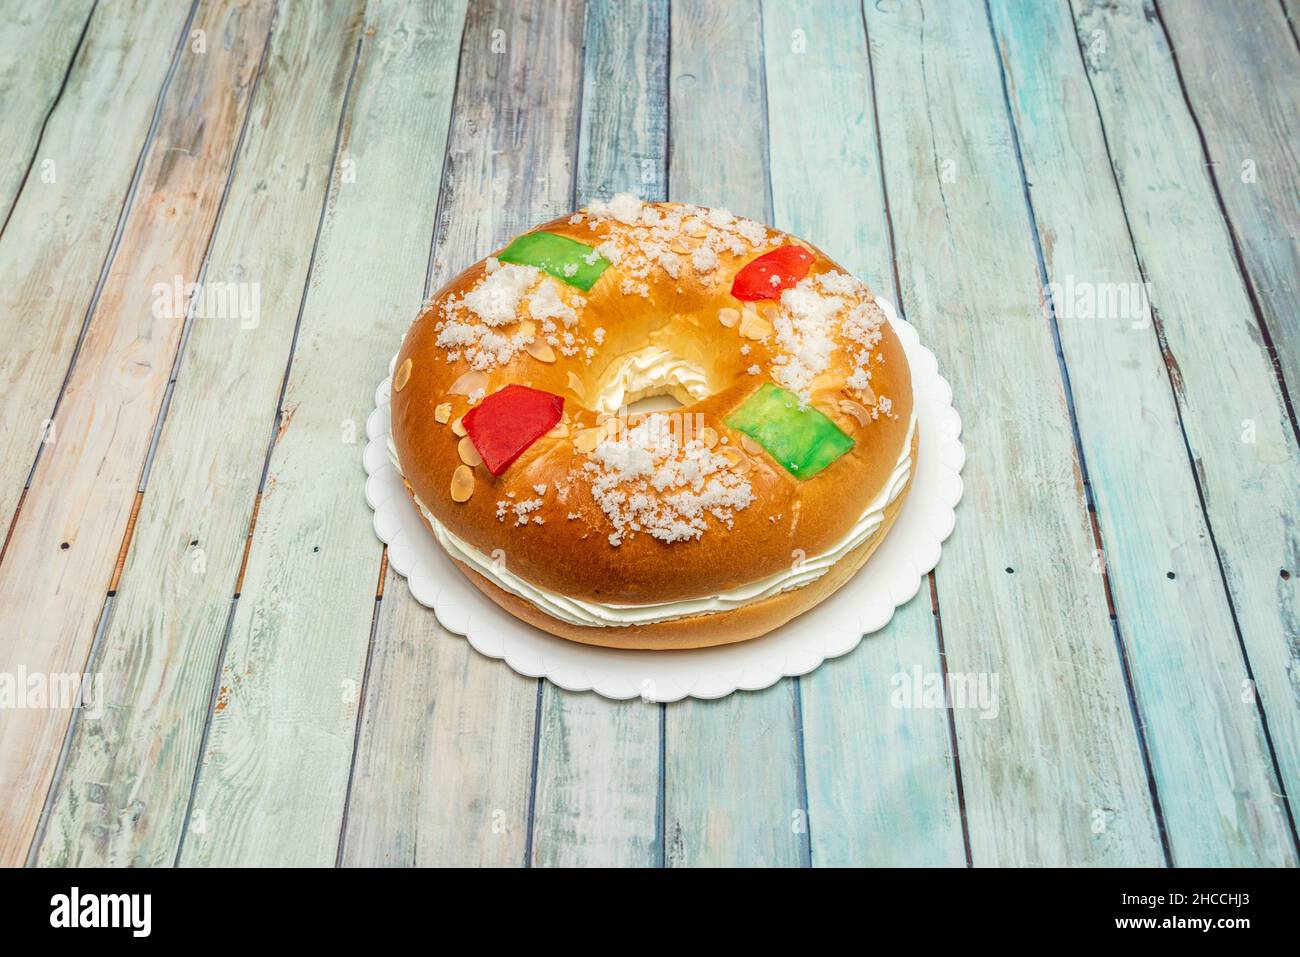 Traditional roscon de reyes stuffed with candied fruits on wooden table Stock Photo